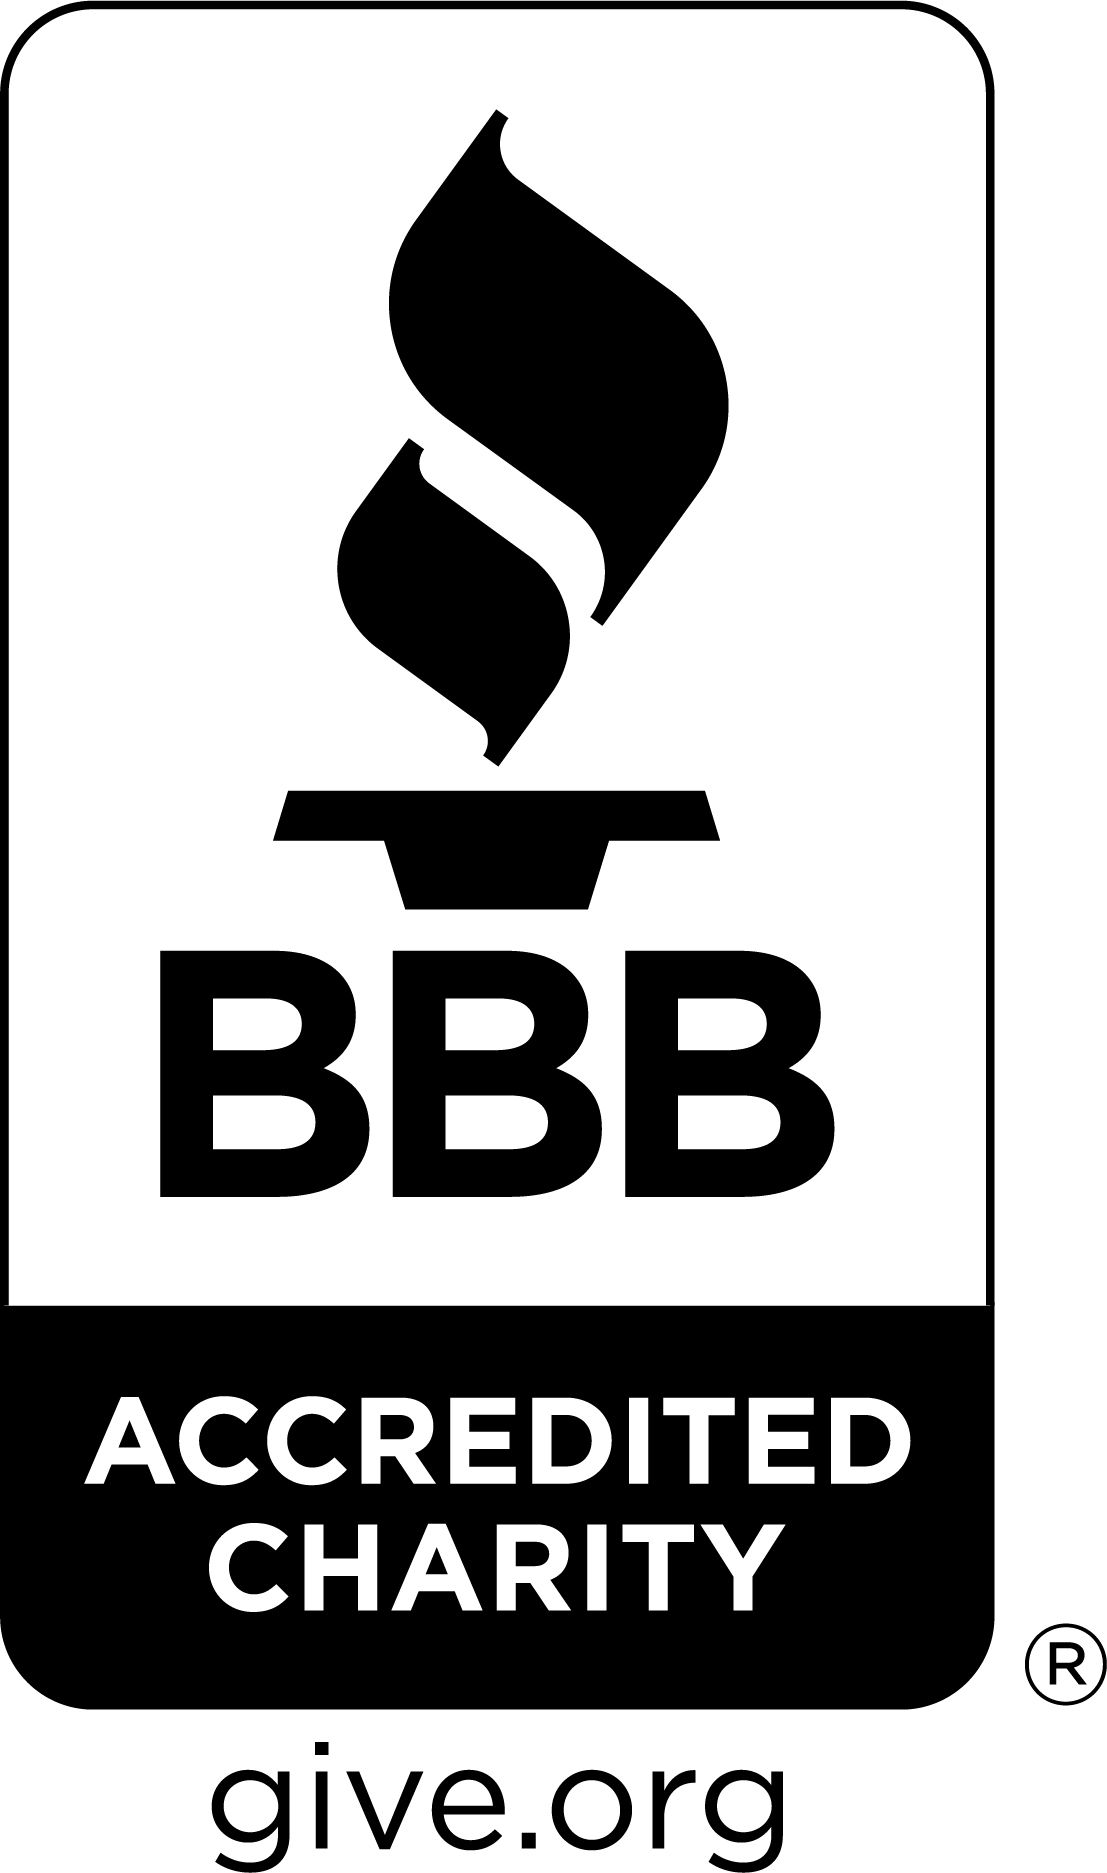 BBB Accredited Charity logo with a stylized torch and website address give.org at the bottom.